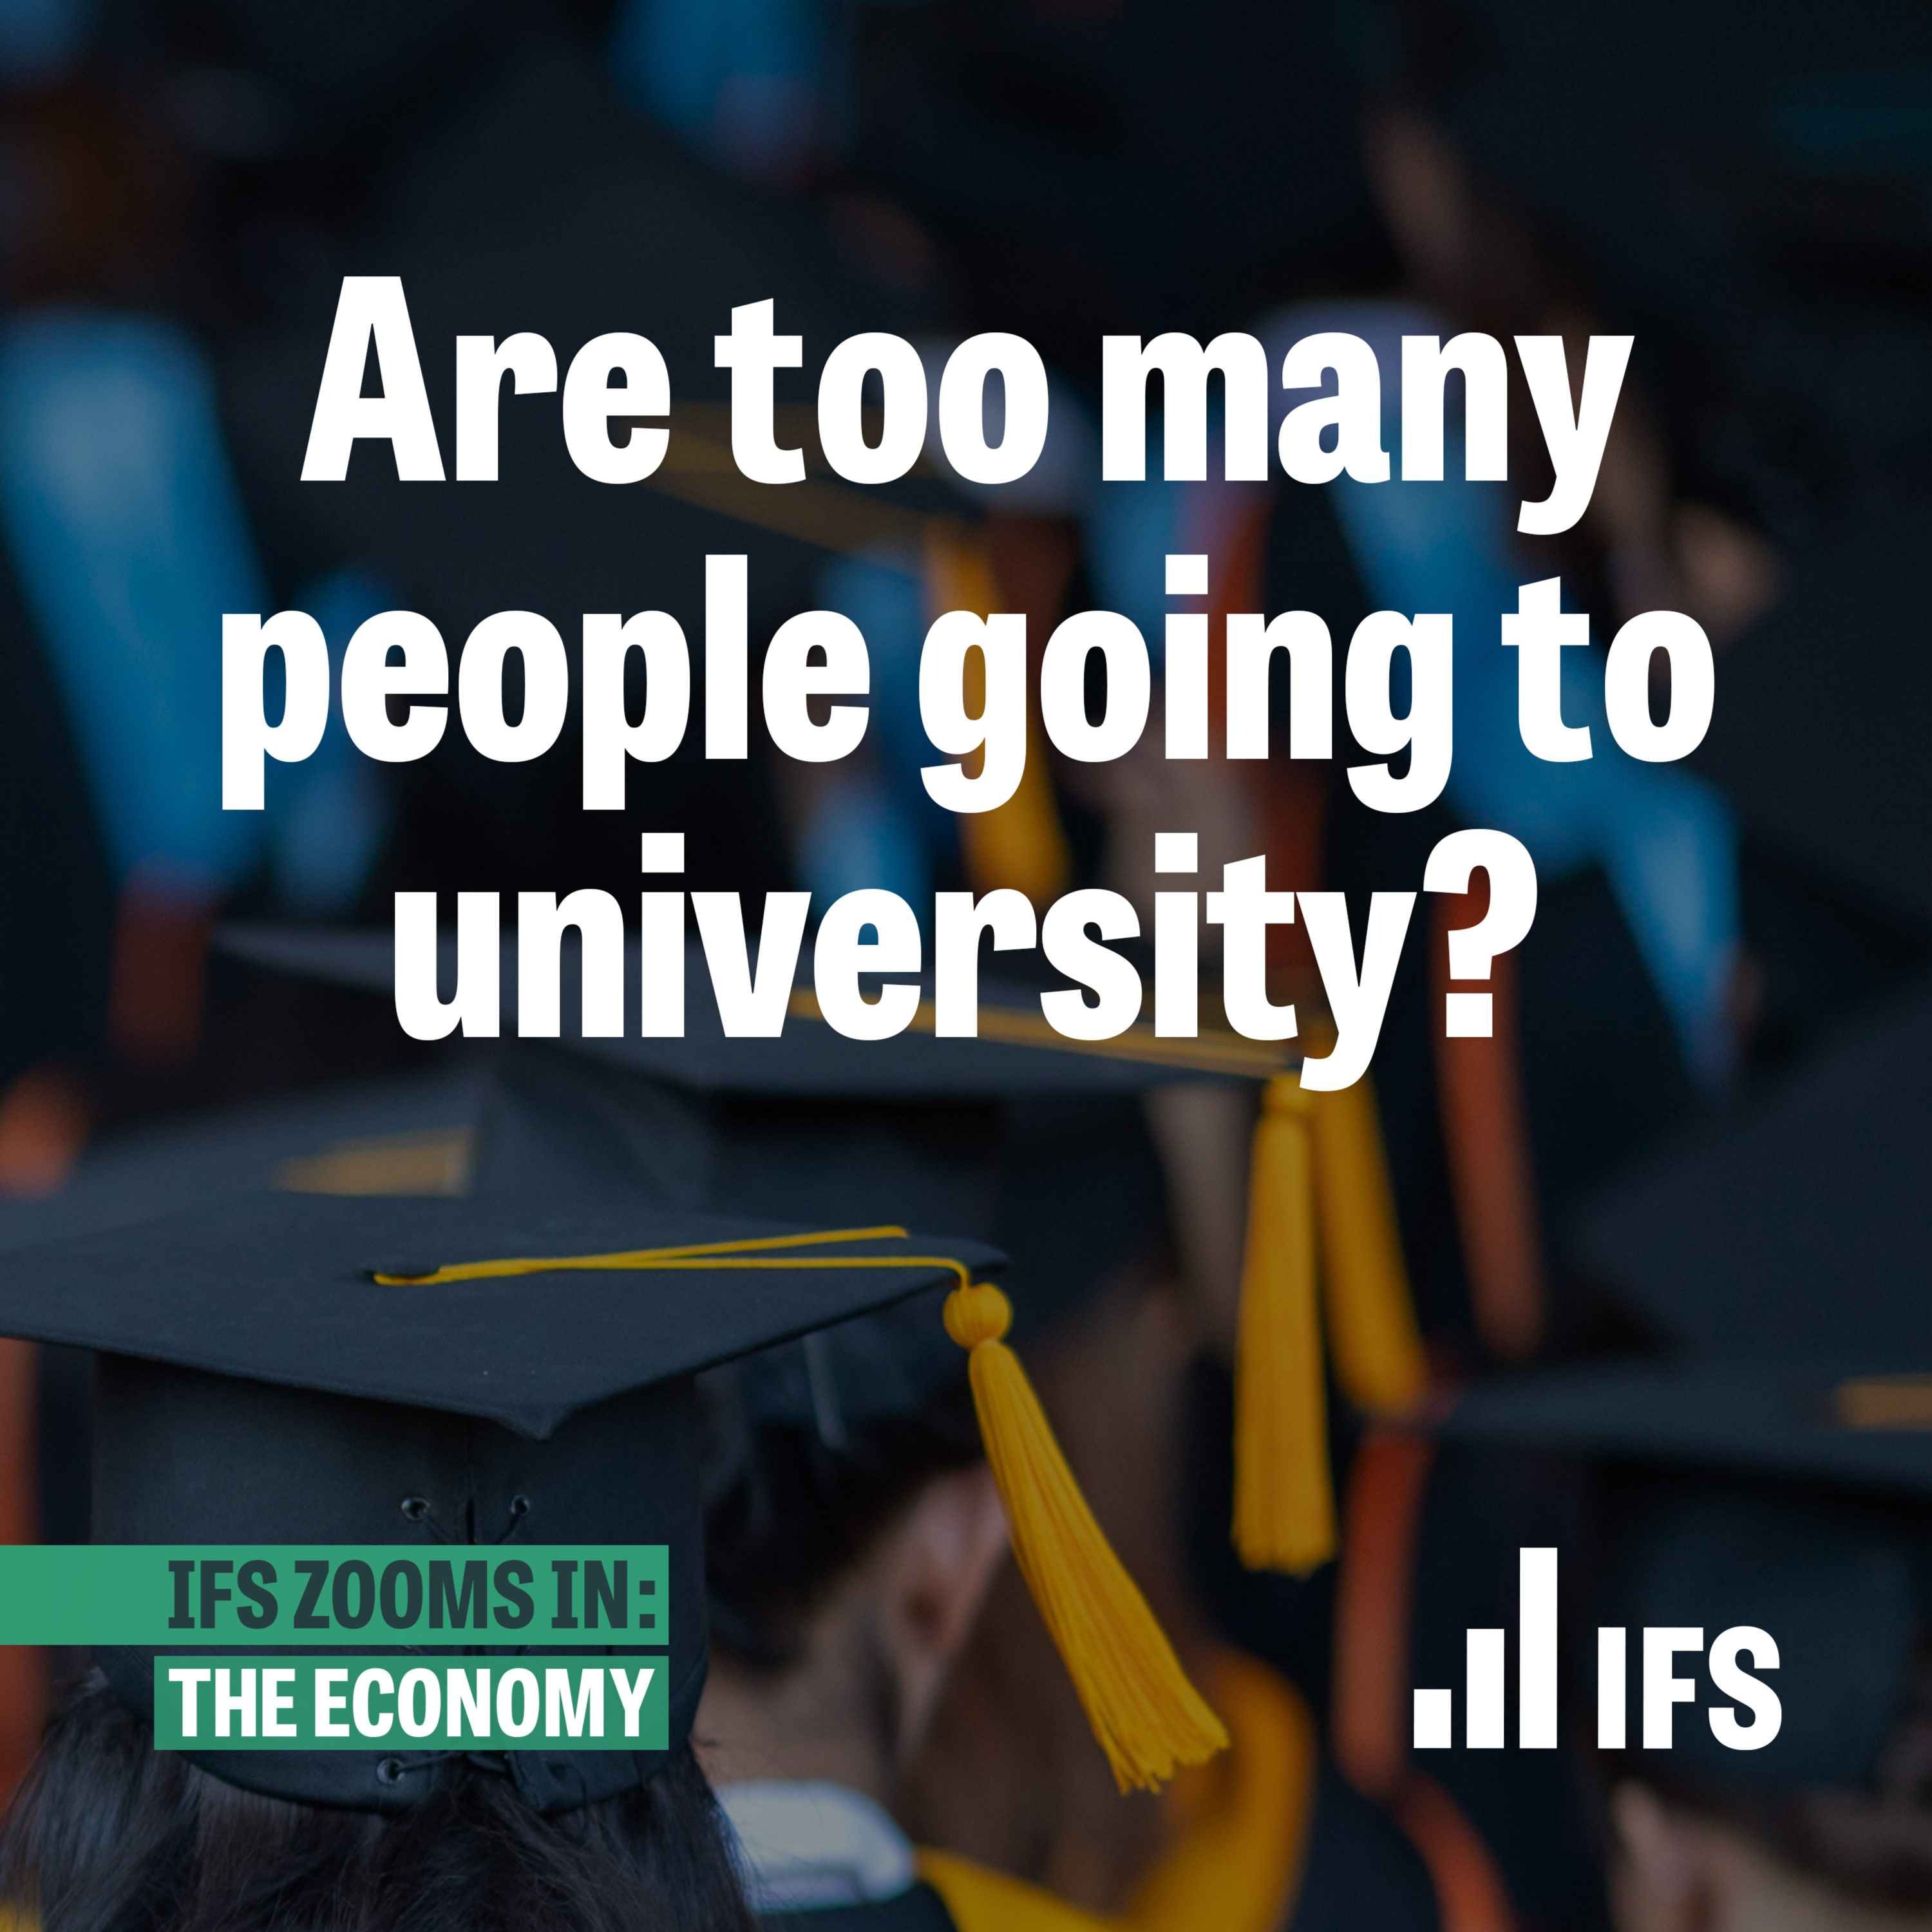 Are too many people going to university?